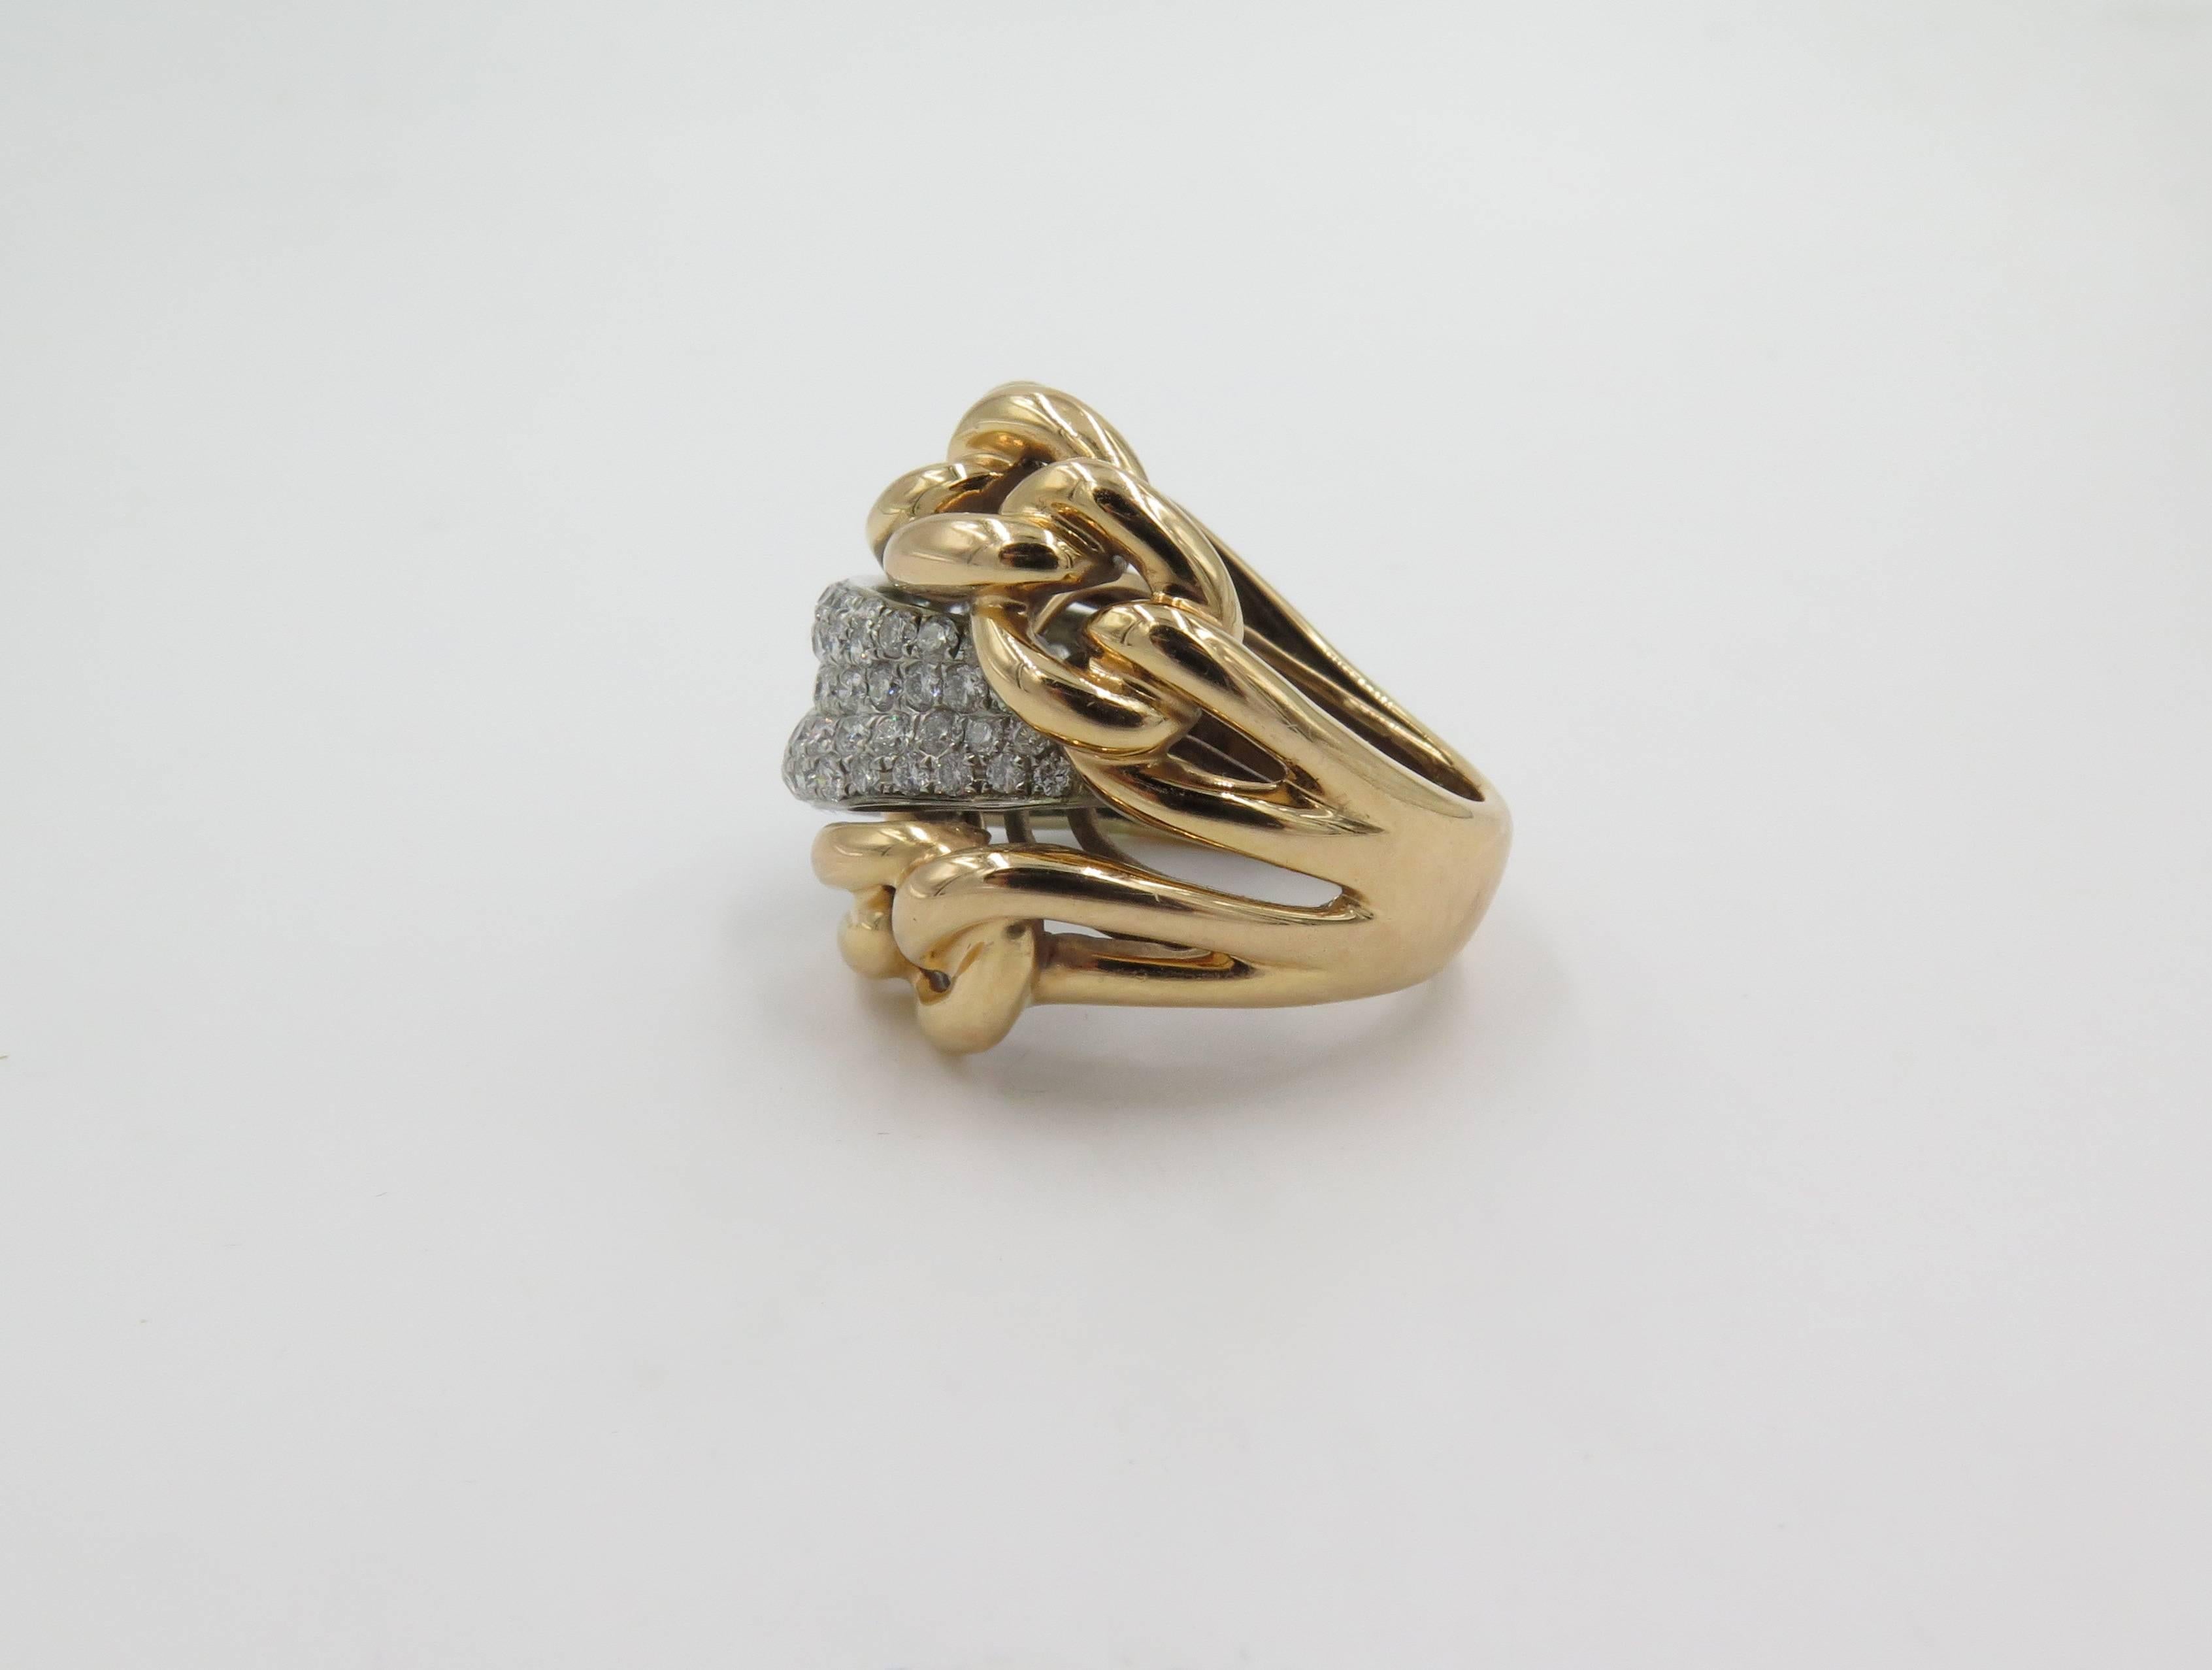 An 18 karat rose gold and diamond ring. Italian. Designed as two polished gold chain link bands, spaced by a pave set diamond scrolling panel. One hundred  diamonds weigh approximately 2.00 carats. Size 8 1/2. Gross weight is approximately 12.4